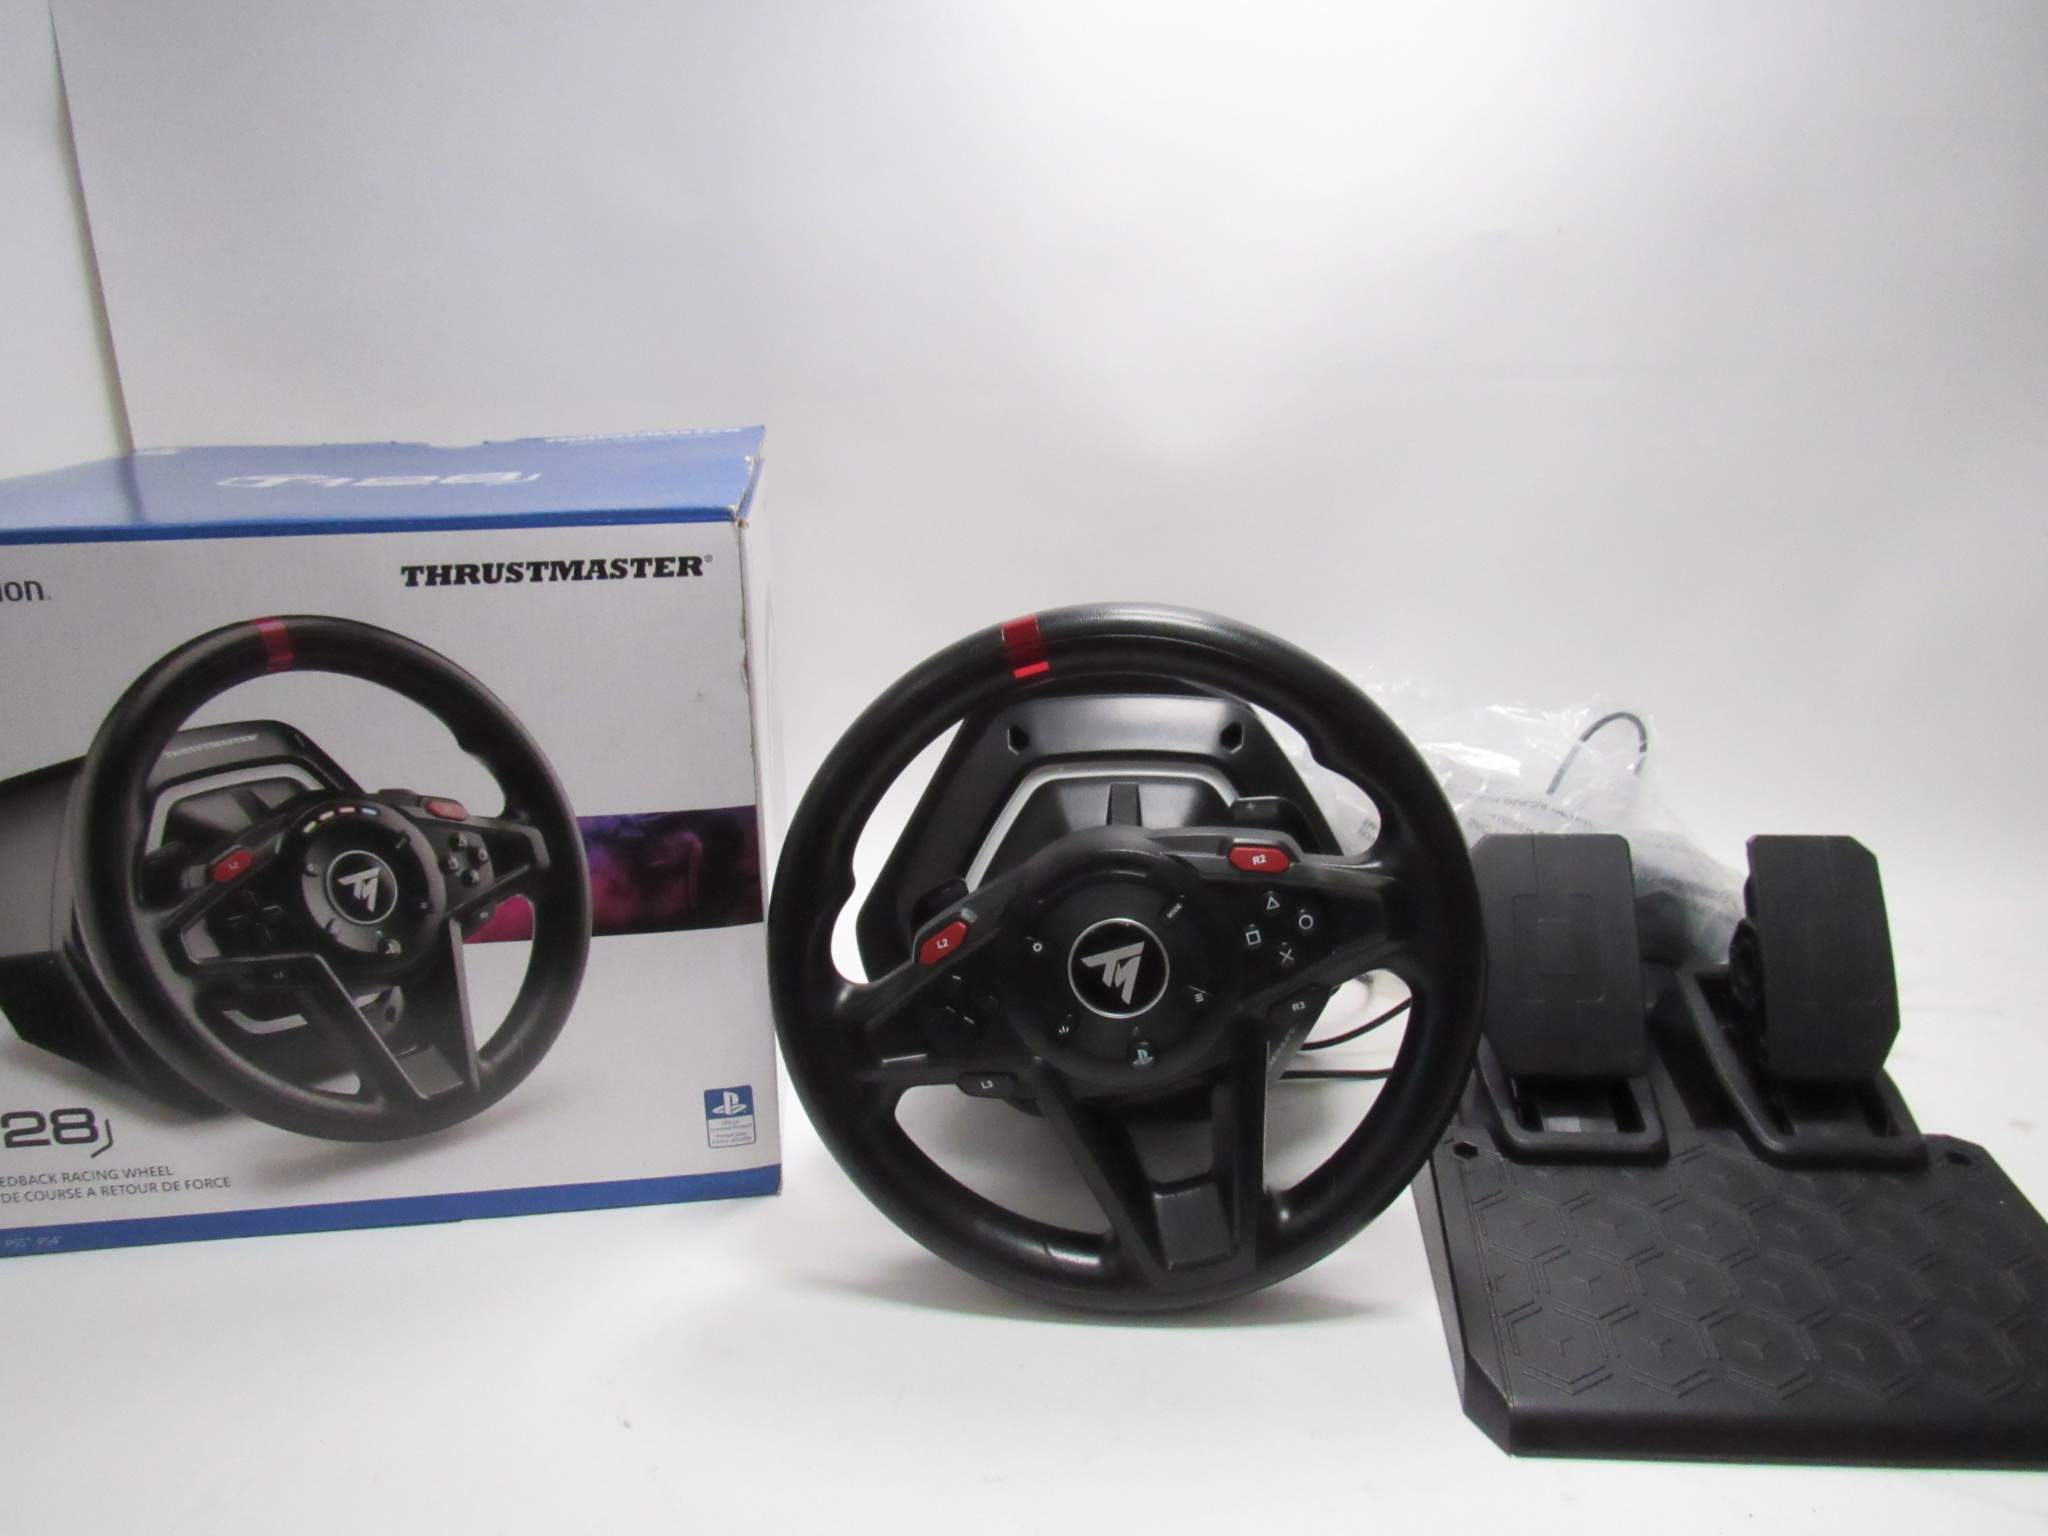 T128 Racing Wheel for PlayStation & PC